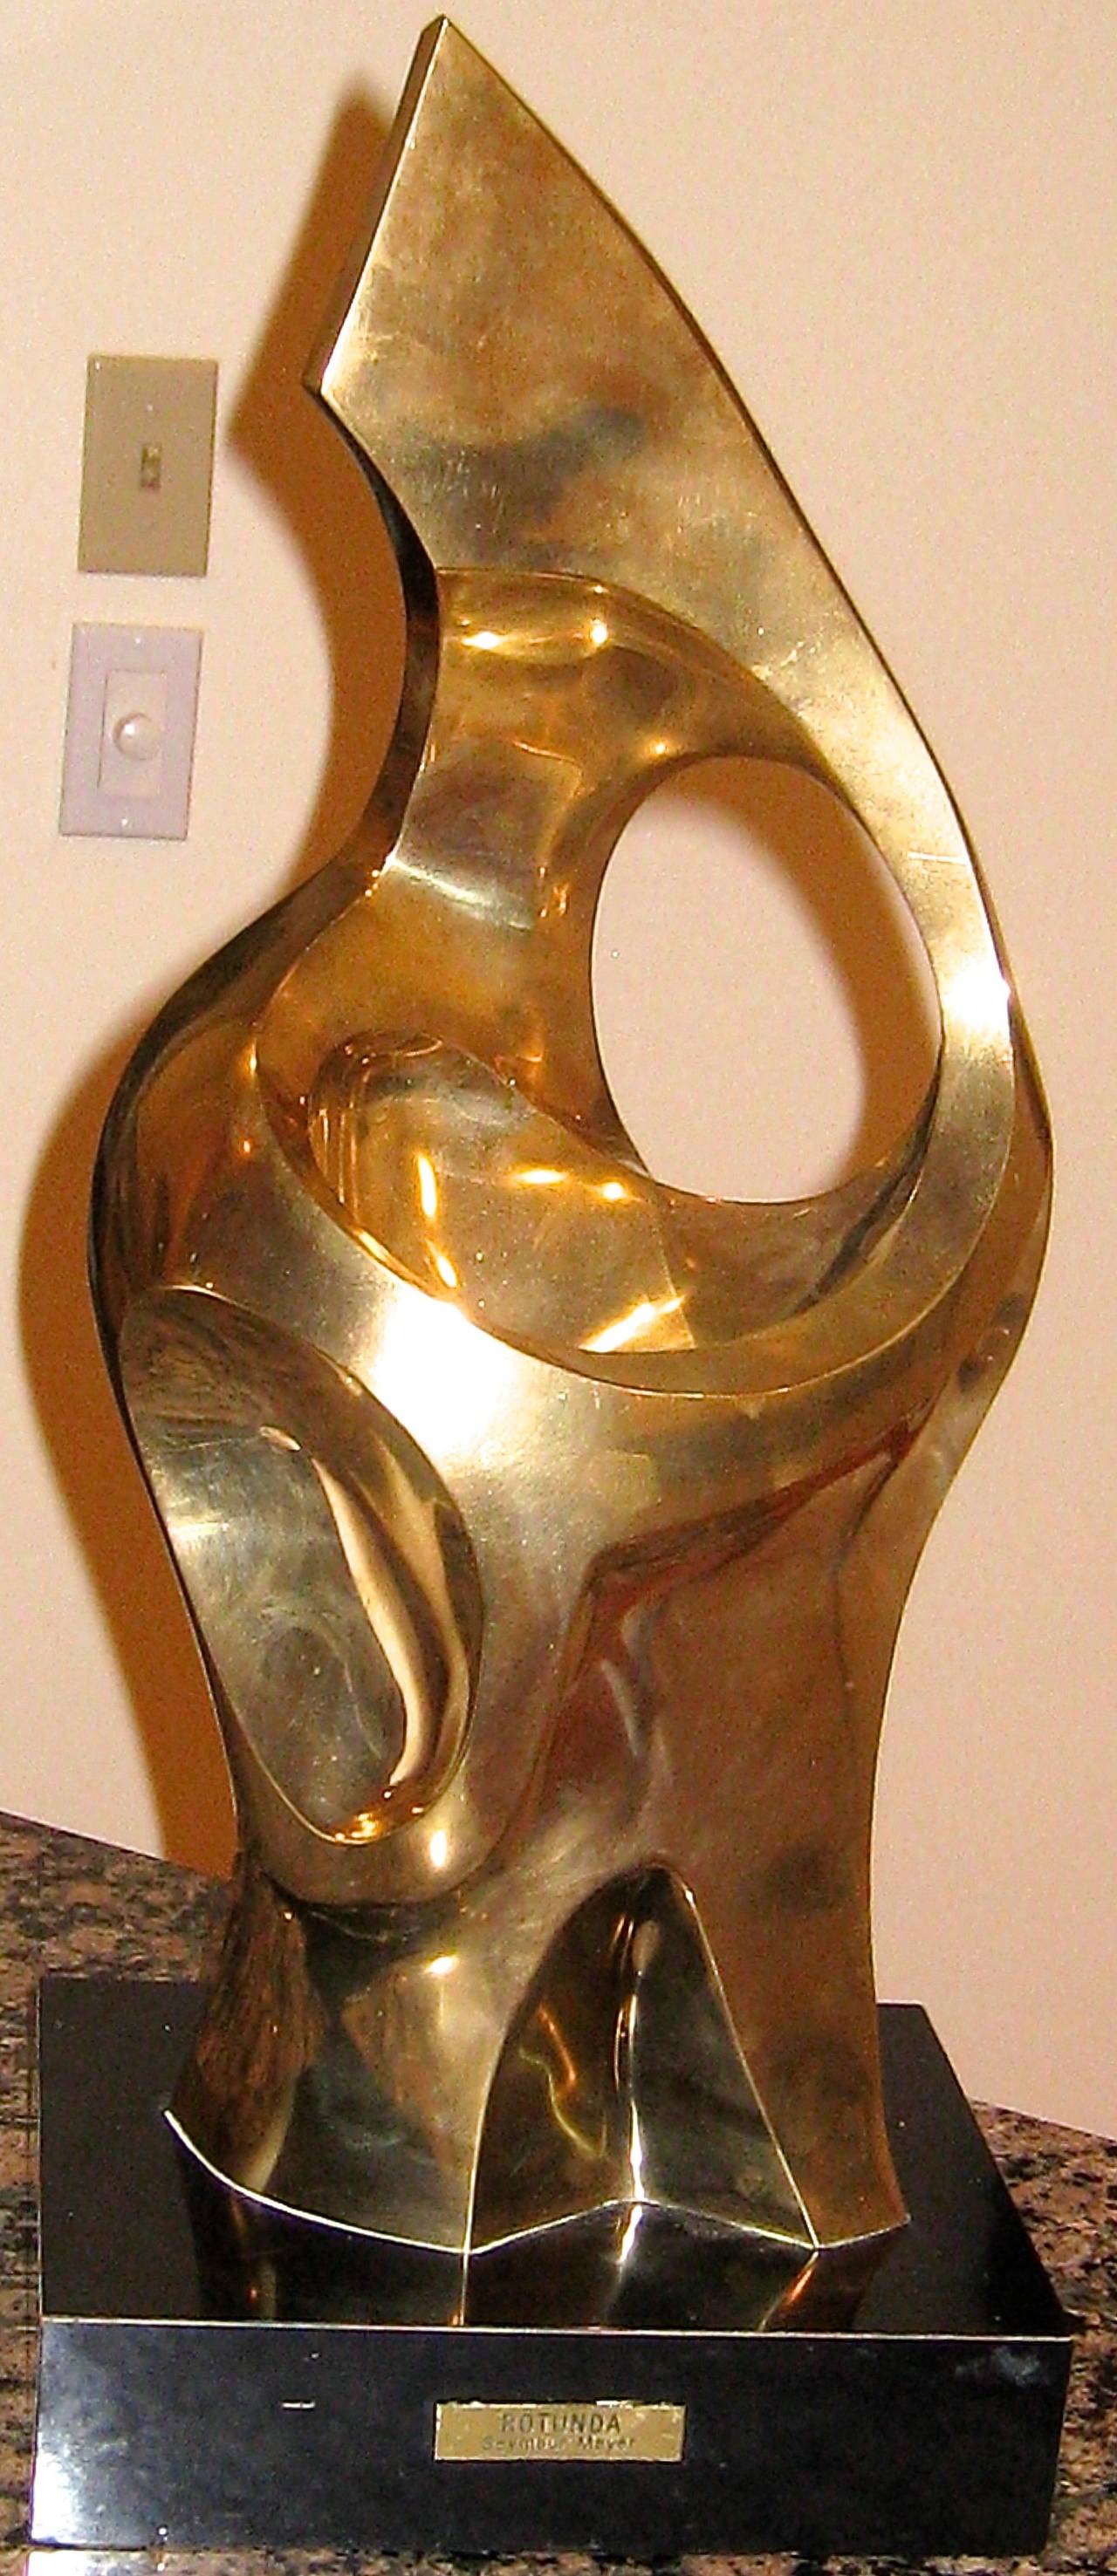 A stunning biomorphic abstract gilt bronze sculpture by Seymour Meyer. (American, b.1914, d. 2009) New York. Signed Meyer 1/9; affixed on an new clear acrylic base. Not shown in image. Retains original brass nameplate, circa 1960s. Base is 2 in. H x